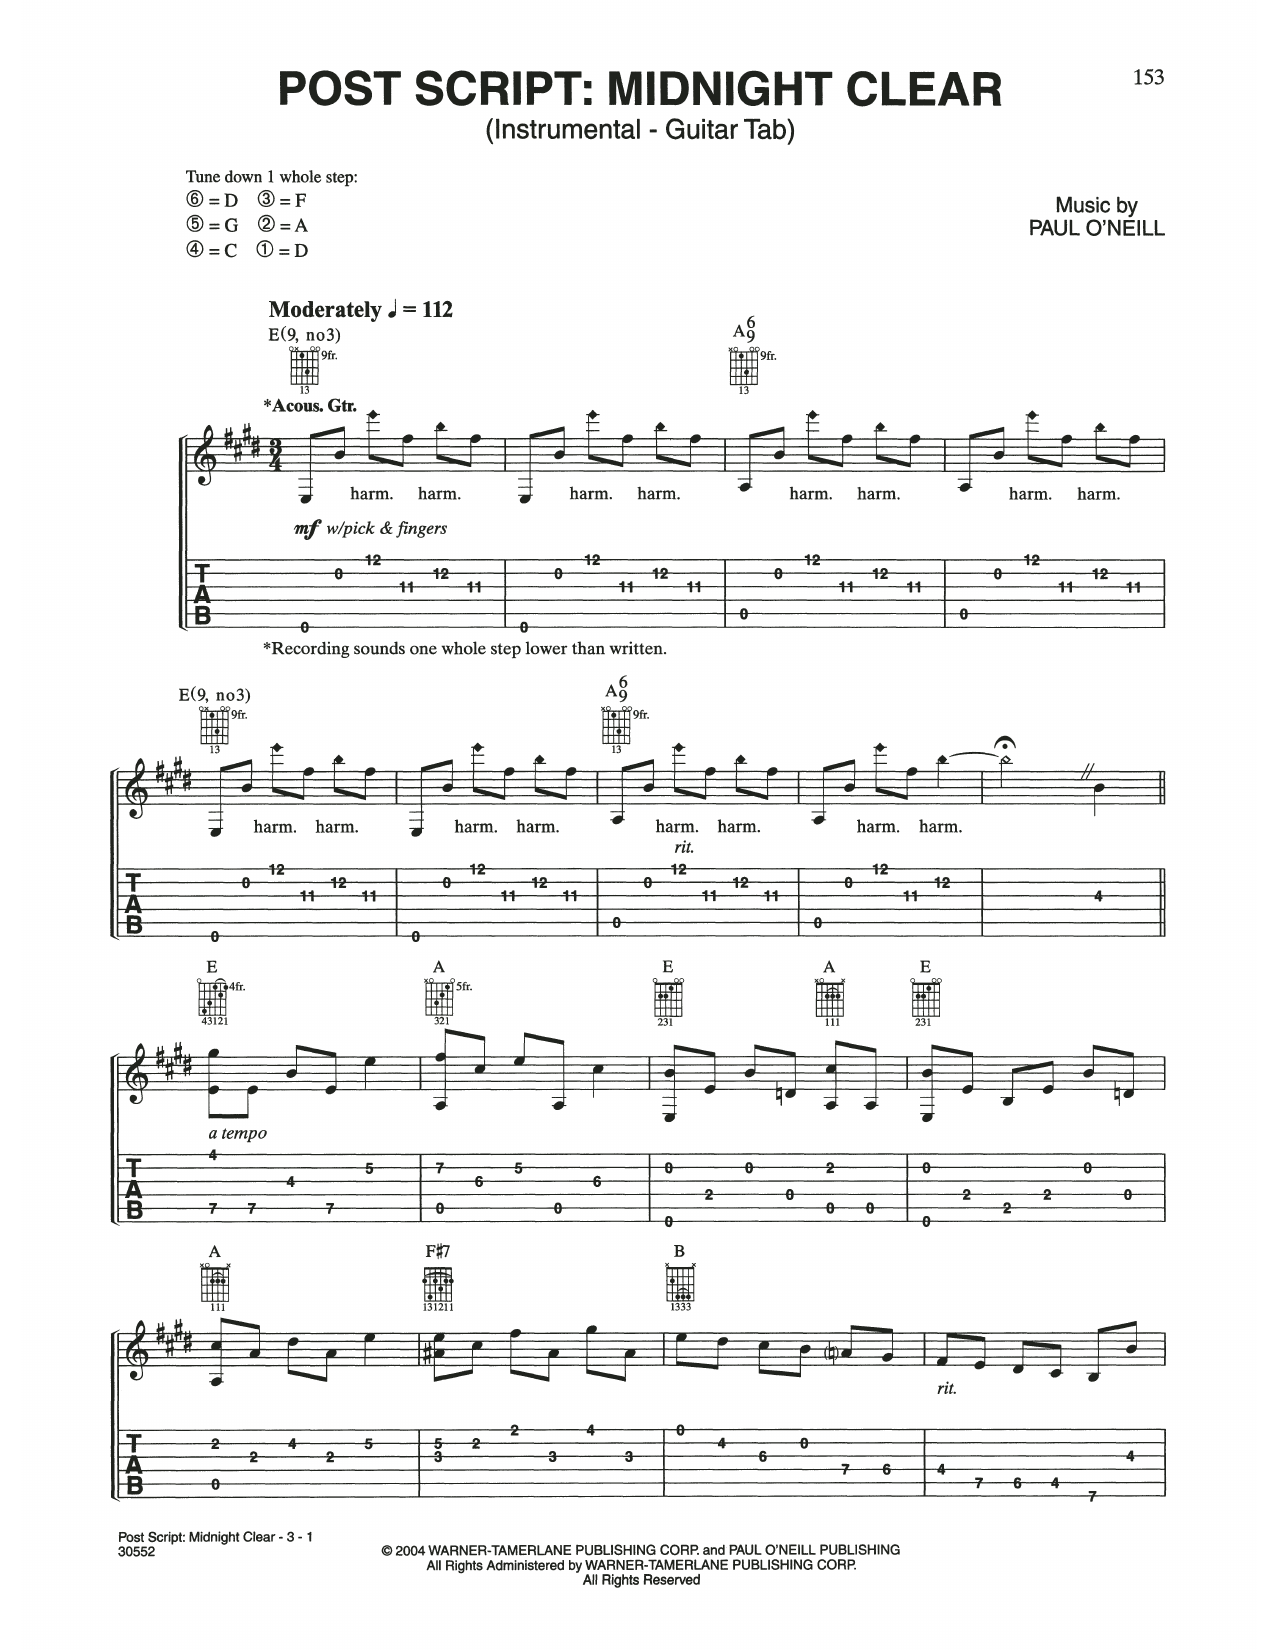 Download Trans-Siberian Orchestra Post Script: Midnight Clear Sheet Music